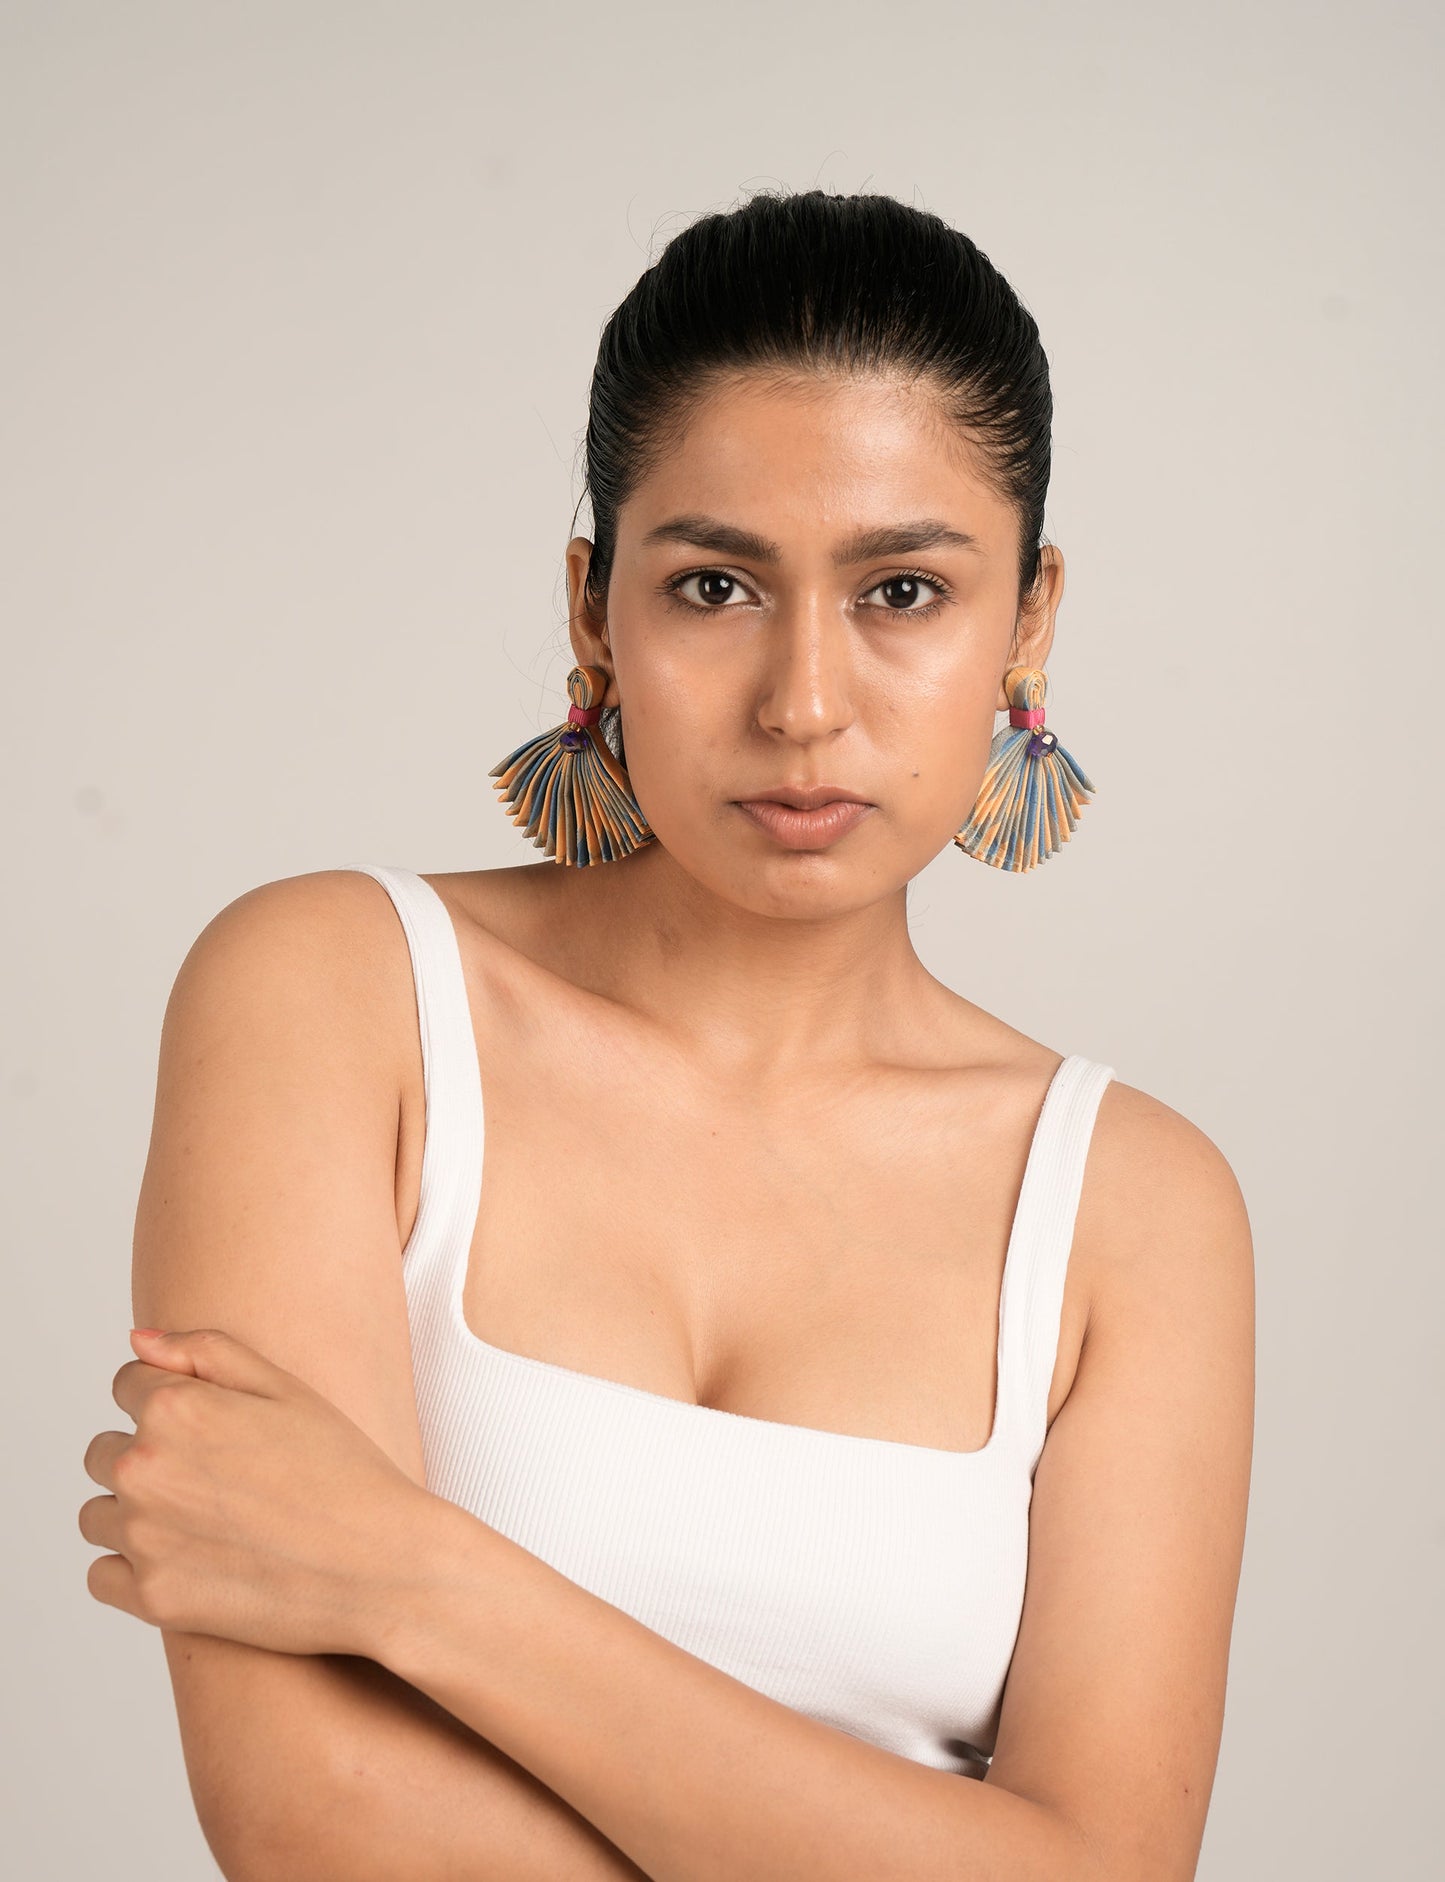 Adorn yourself sustainably with our PLEATED EARRINGS – fan-shaped wonders with a top knot and a tiny stone. Meticulously hand-pleated from Indian saris, these earrings reflect ethical clothing, green fashion, and slow fashion. Fastened with hypoallergy tested metal hooks, nickel, and lead-free, making them a conscious and stylish accessory.